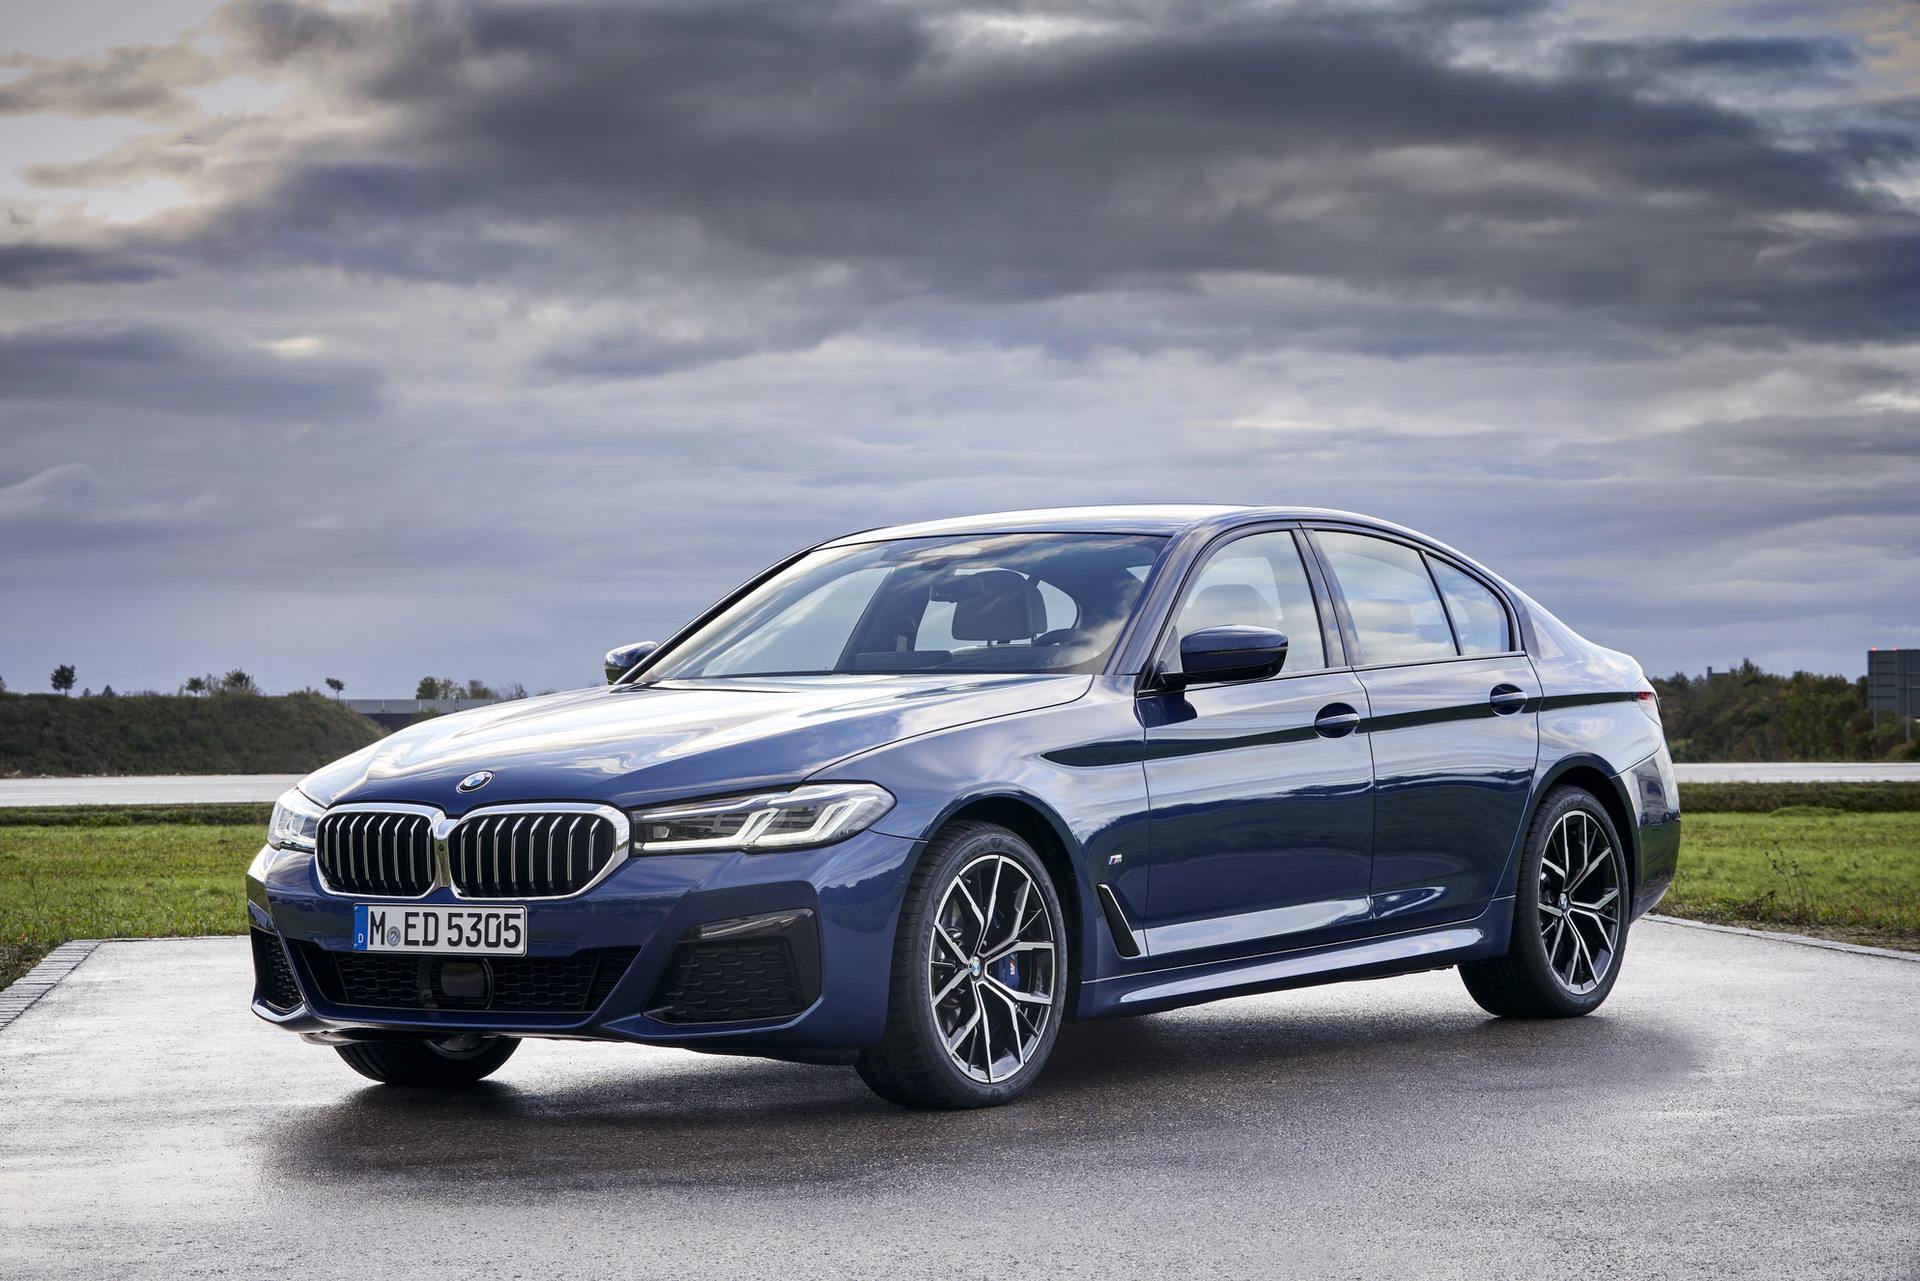 BMW 5 Series - Reviews, Test Drives, Pricing and Features